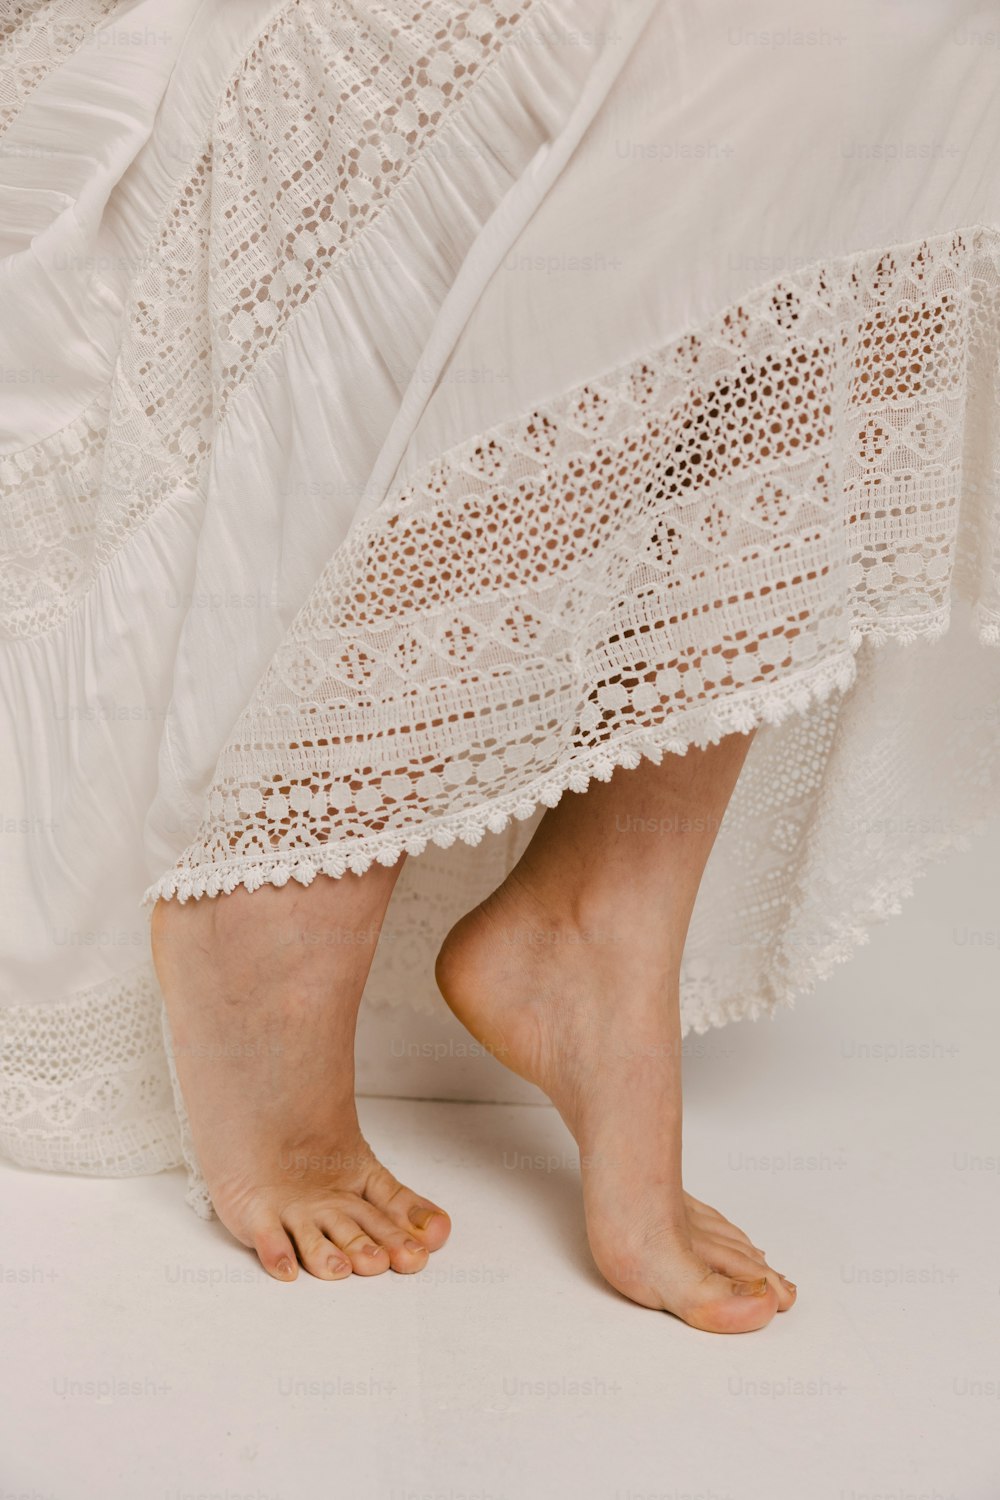 55,882 Woman Feet Pics Stock Photos, High-Res Pictures, and Images